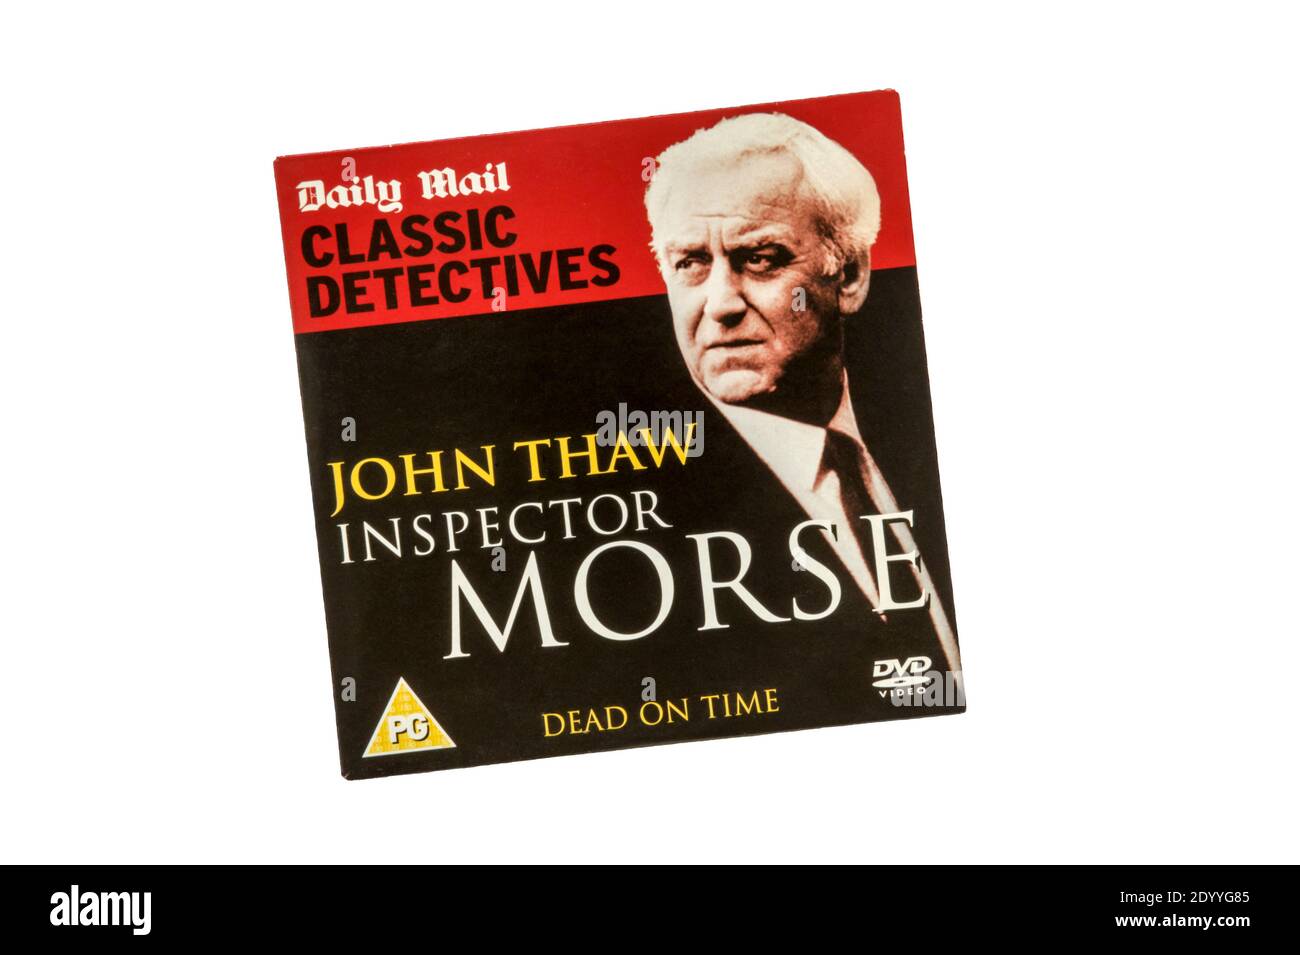 A DVD of John Thaw as Inspector Morse in Dead of Time.  Given away free with the Daily Mail newspaper. Stock Photo